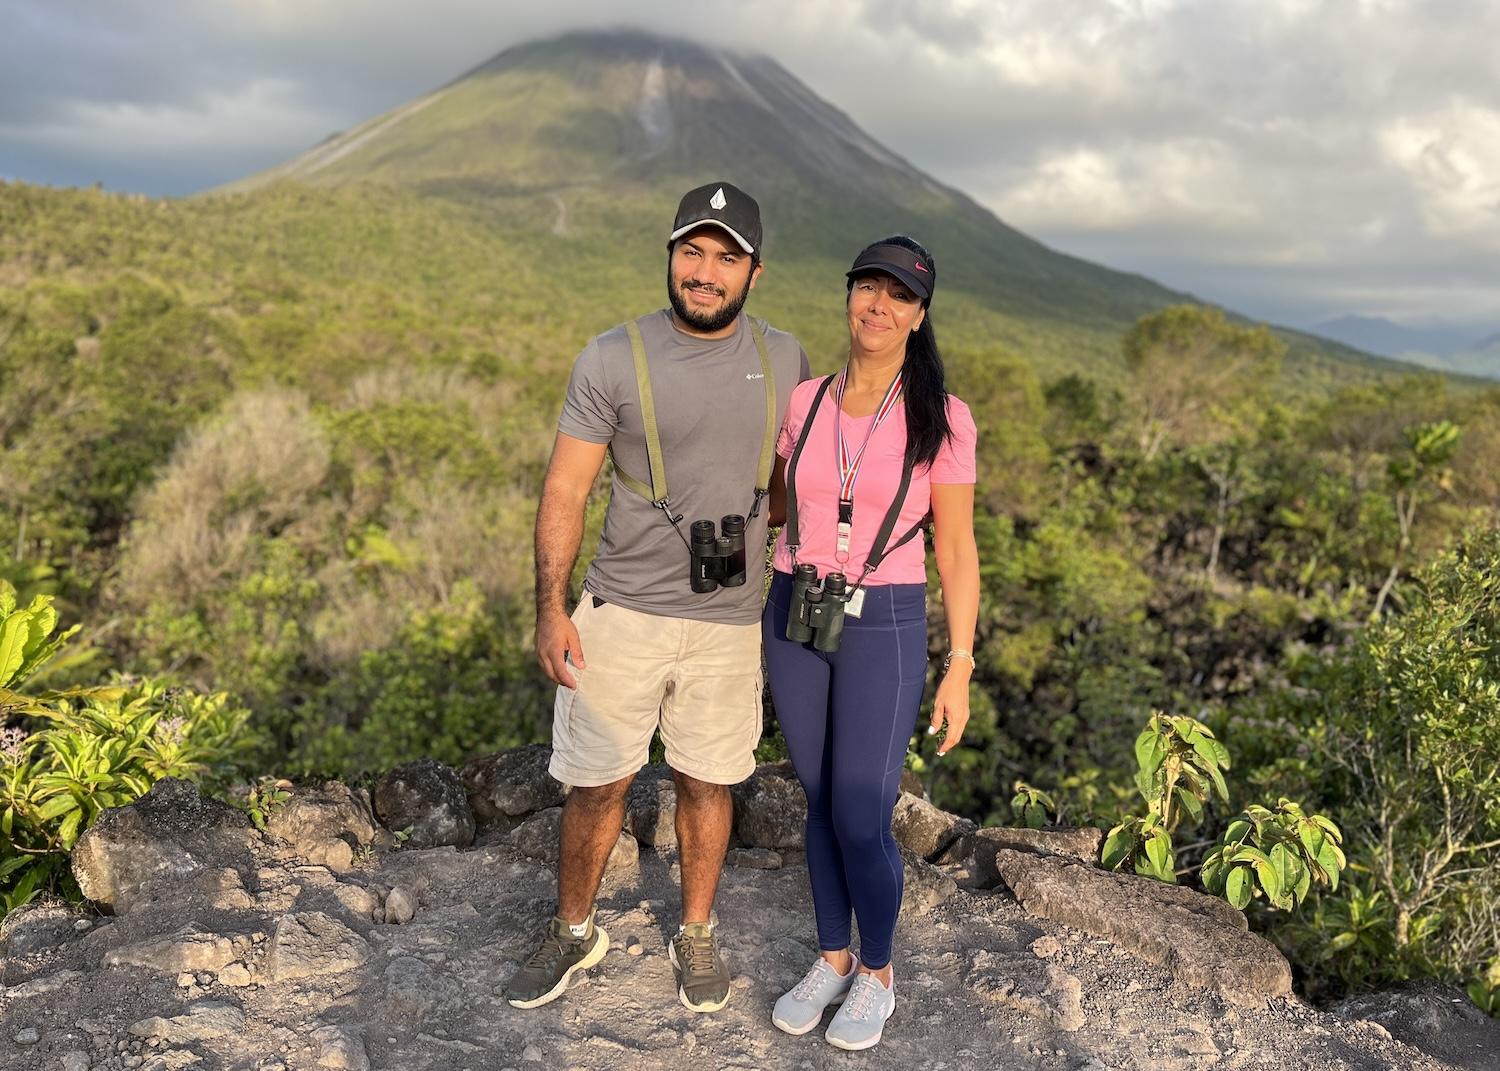 Jarvin Morra and Rebecca Gómez are shown while hiking in Arenal 1968 next to Arenal Volcano National Park.